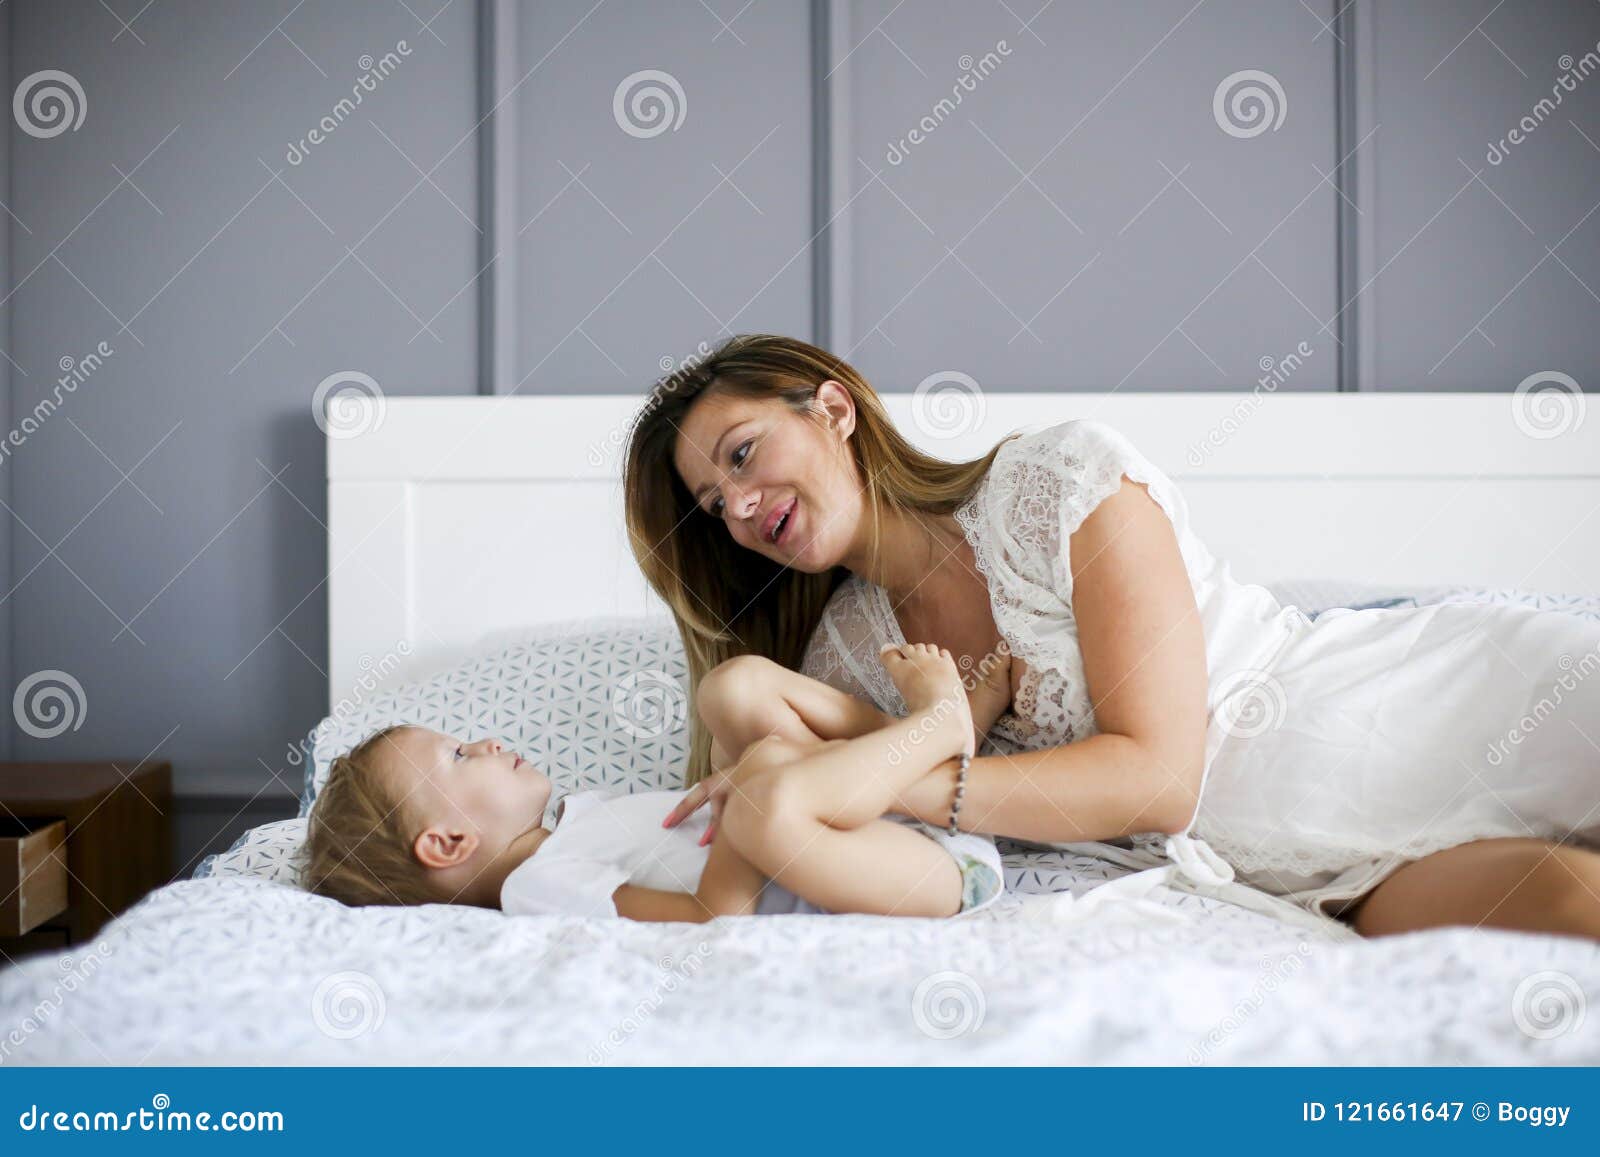 Young Mother With Son In The Bed Stock Image Image Of Indoor Laugh